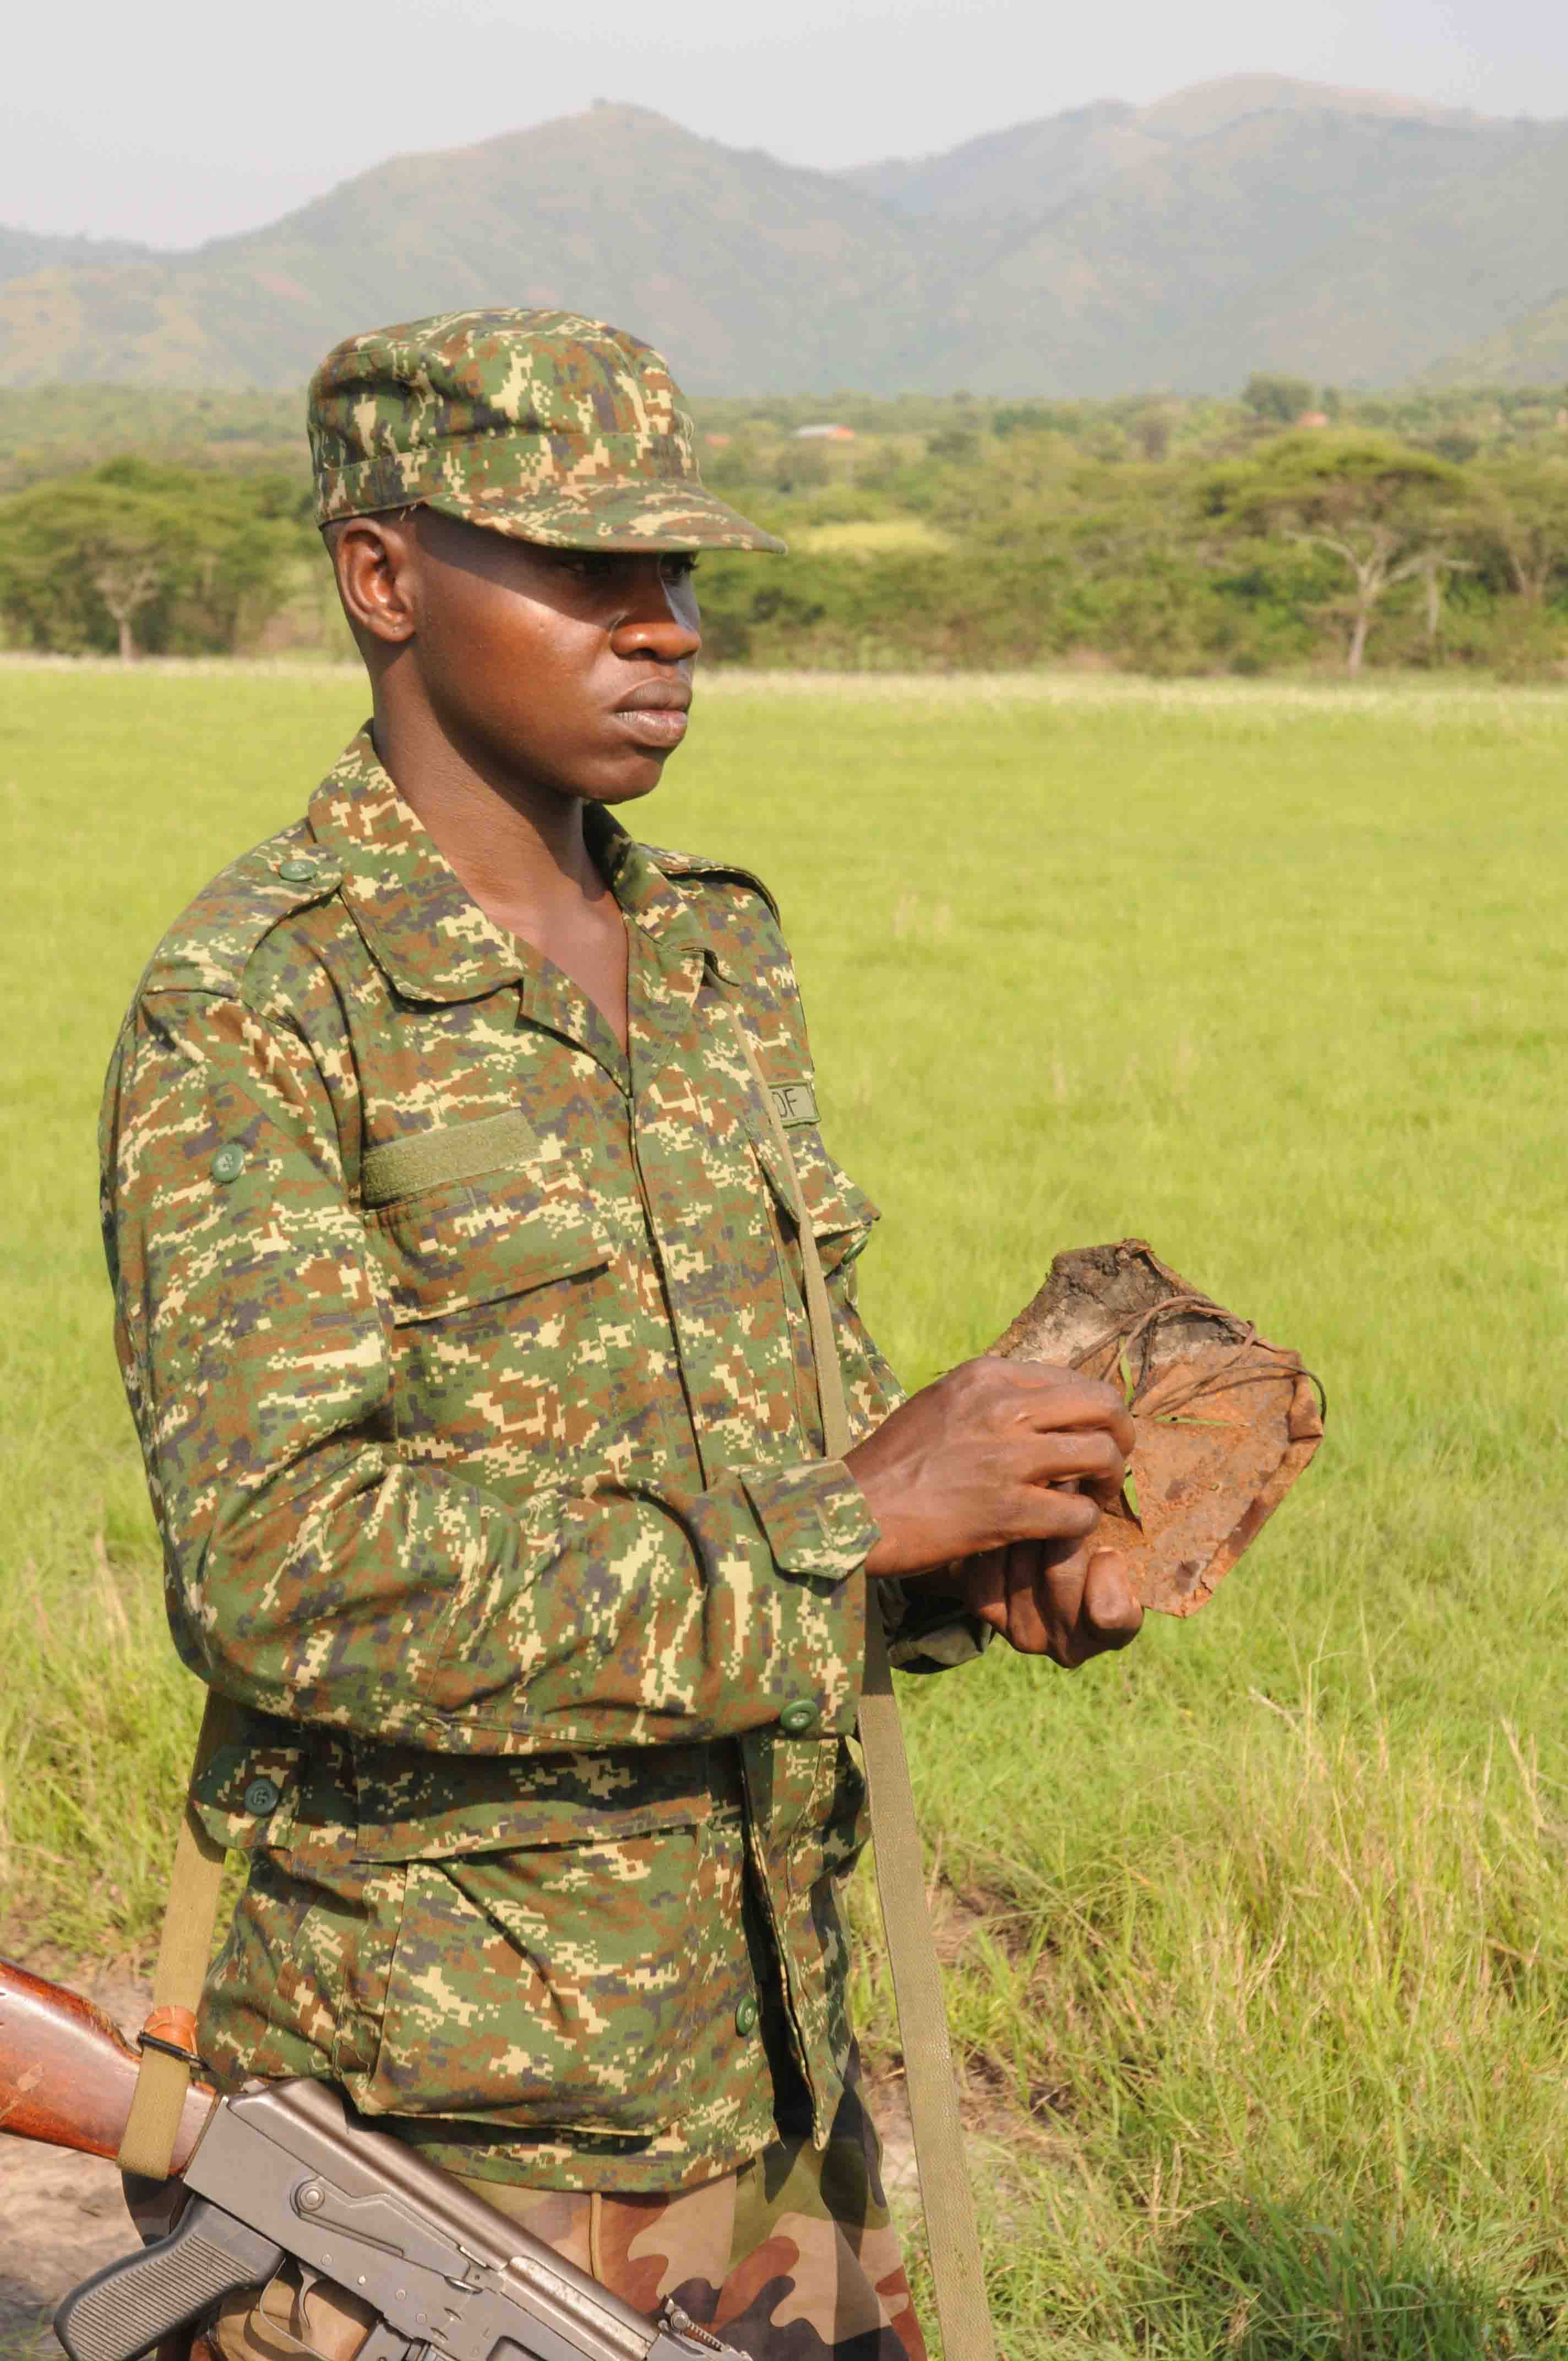 Image: Ranger with snare (credit: Dr Andrew Plumptre, Wildlife Conservation Society)